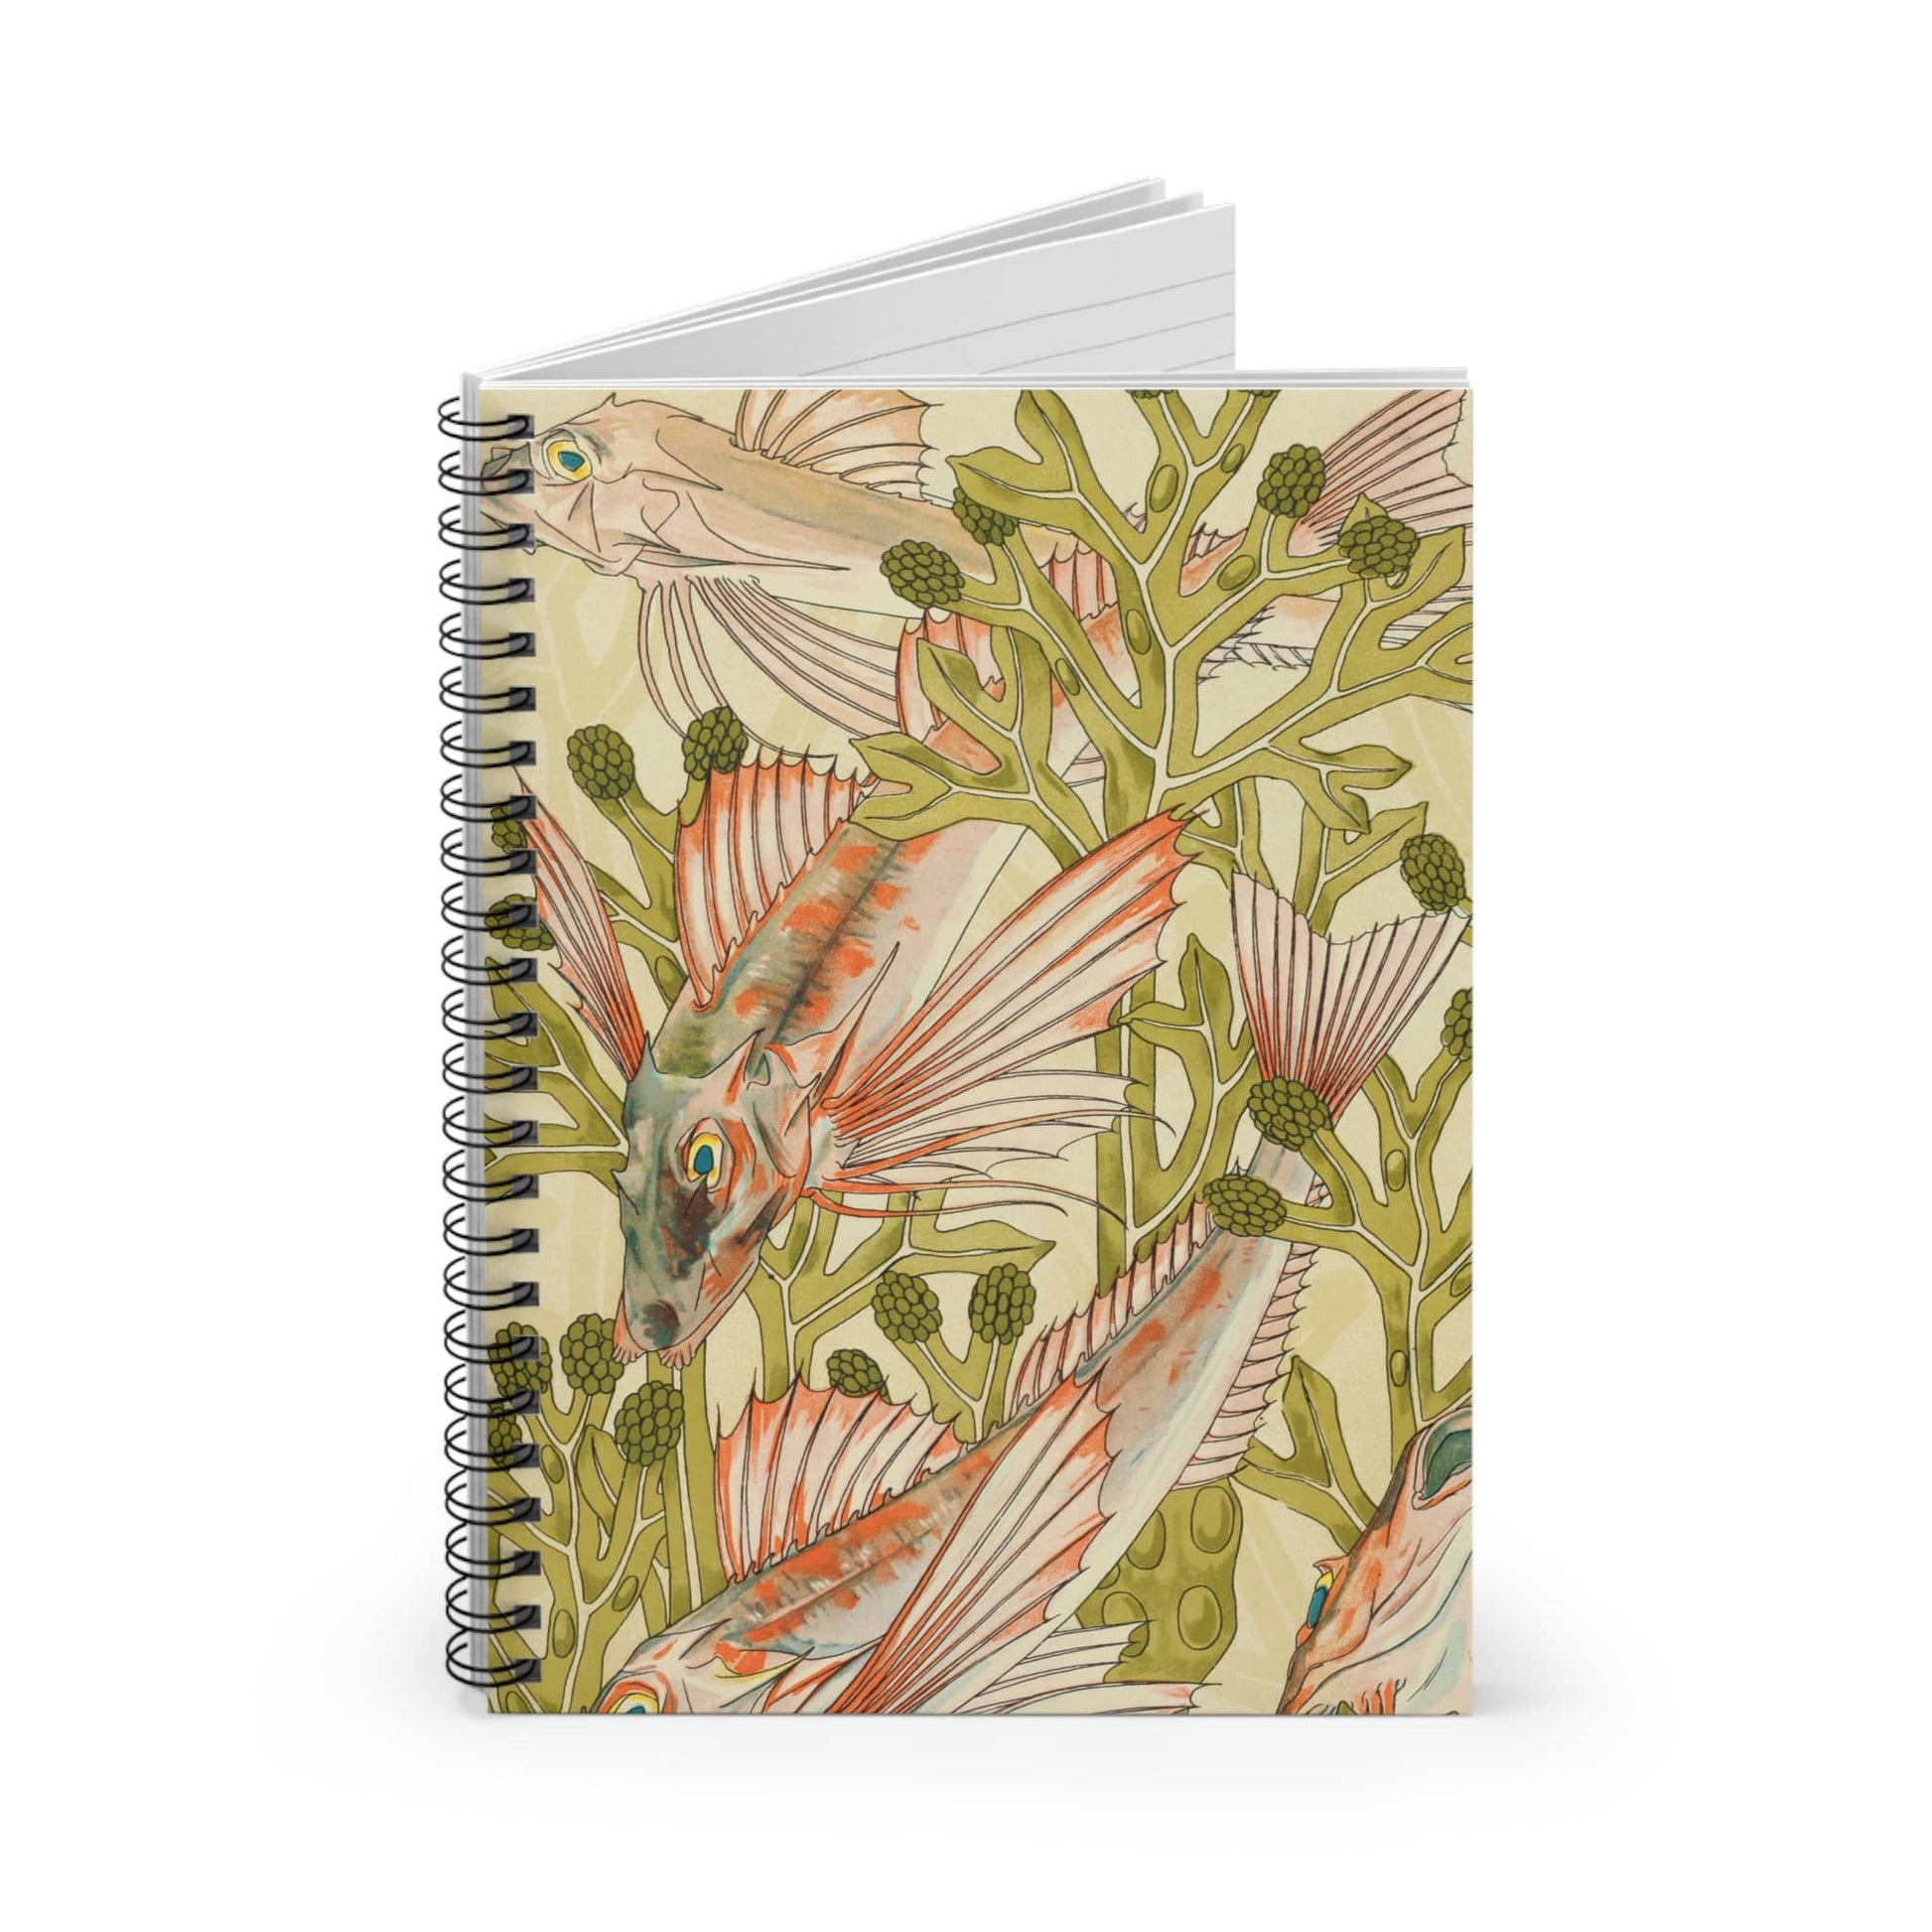 Fish in Seaweed Spiral Notebook Standing up on White Desk